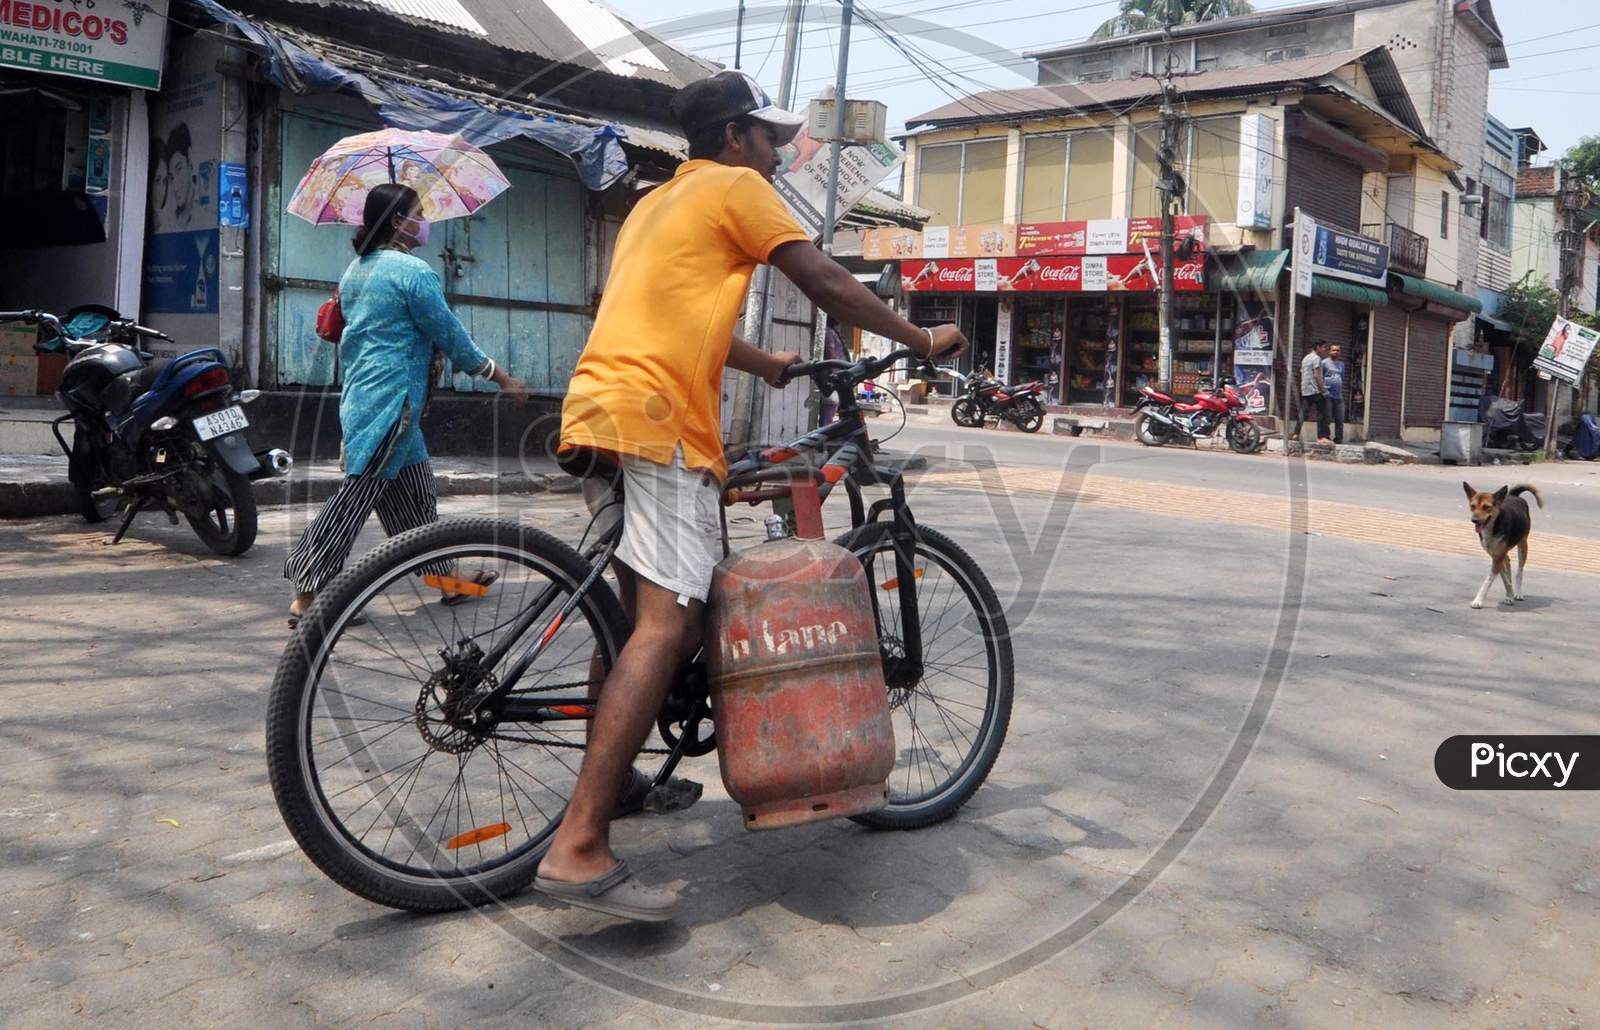 People Carry An Lpg Cylinder During 4 Day Of Complete Lockdown In The Wake Of The Corona Virus Pandemic In Guwahati On Saturday, 28 March 2020.